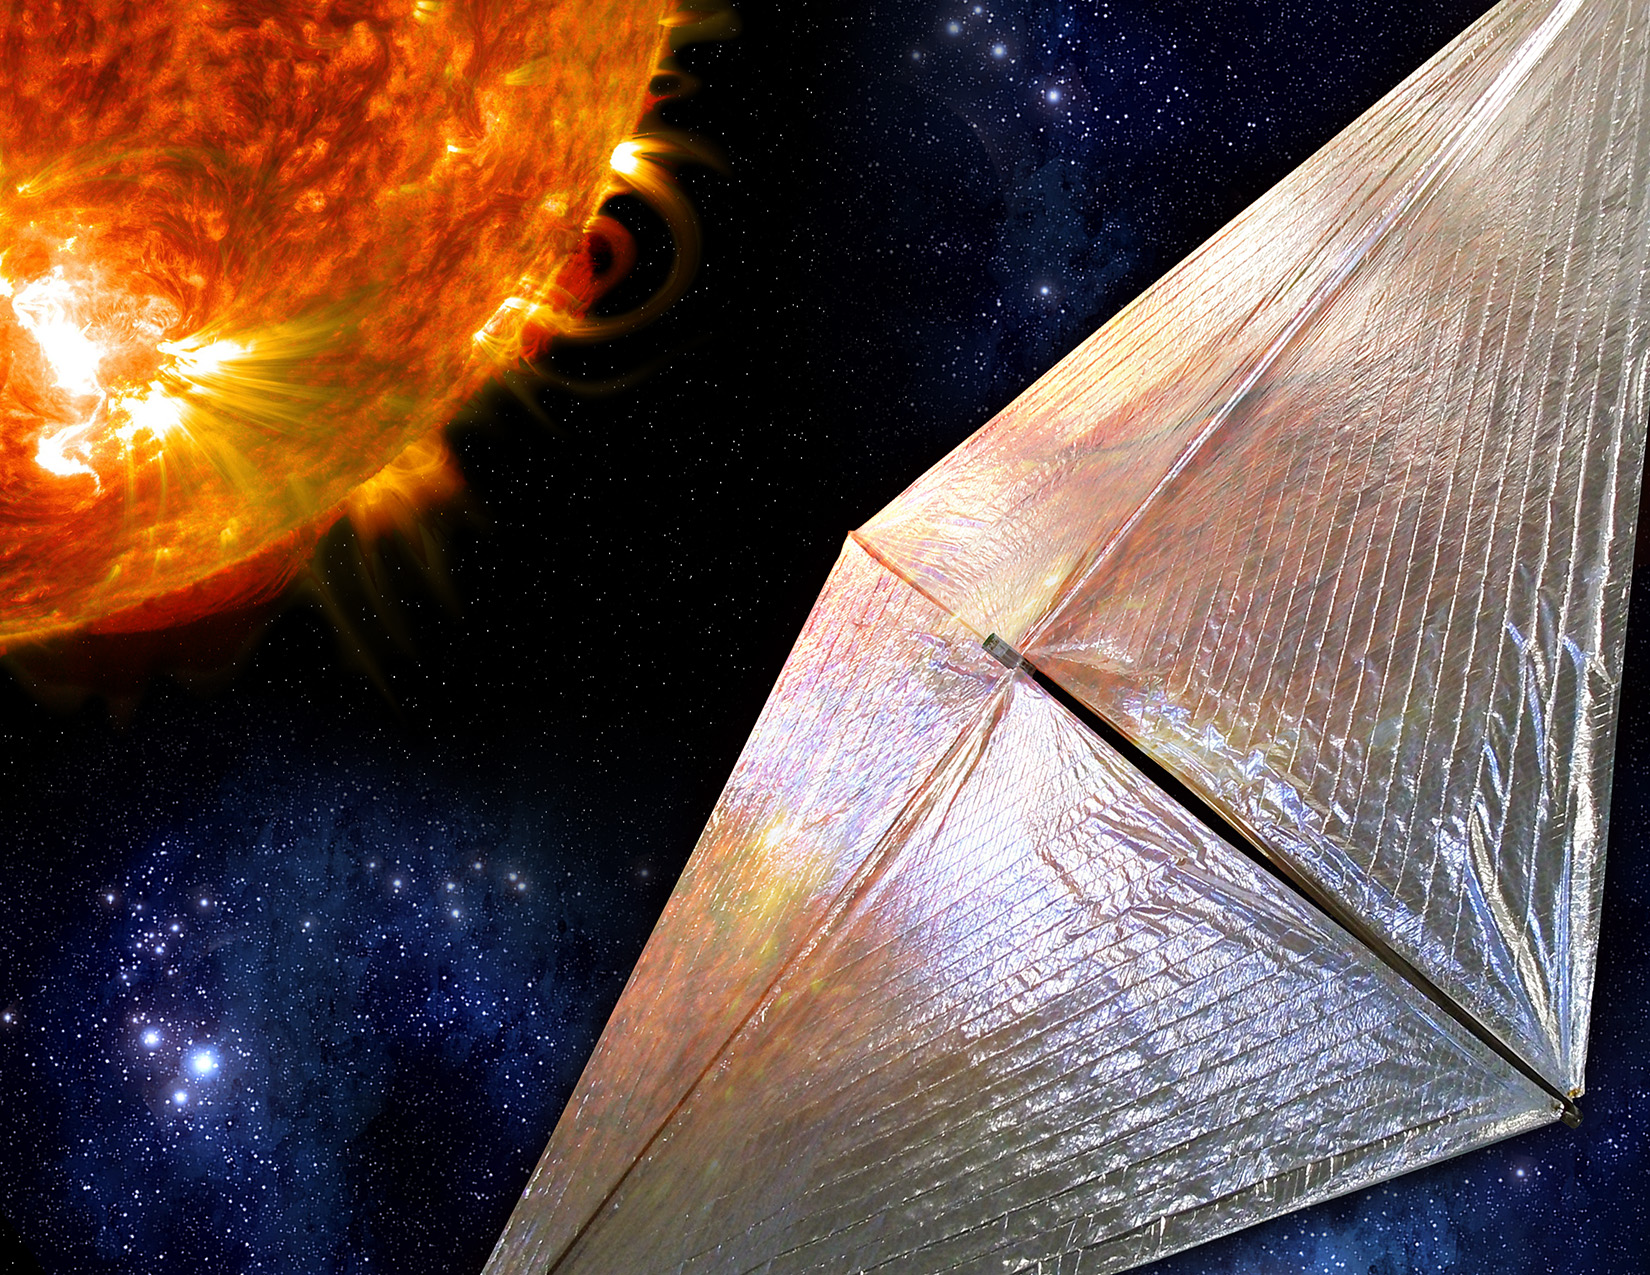 : An illustration of the Solar Cruiser approaching the Sun.